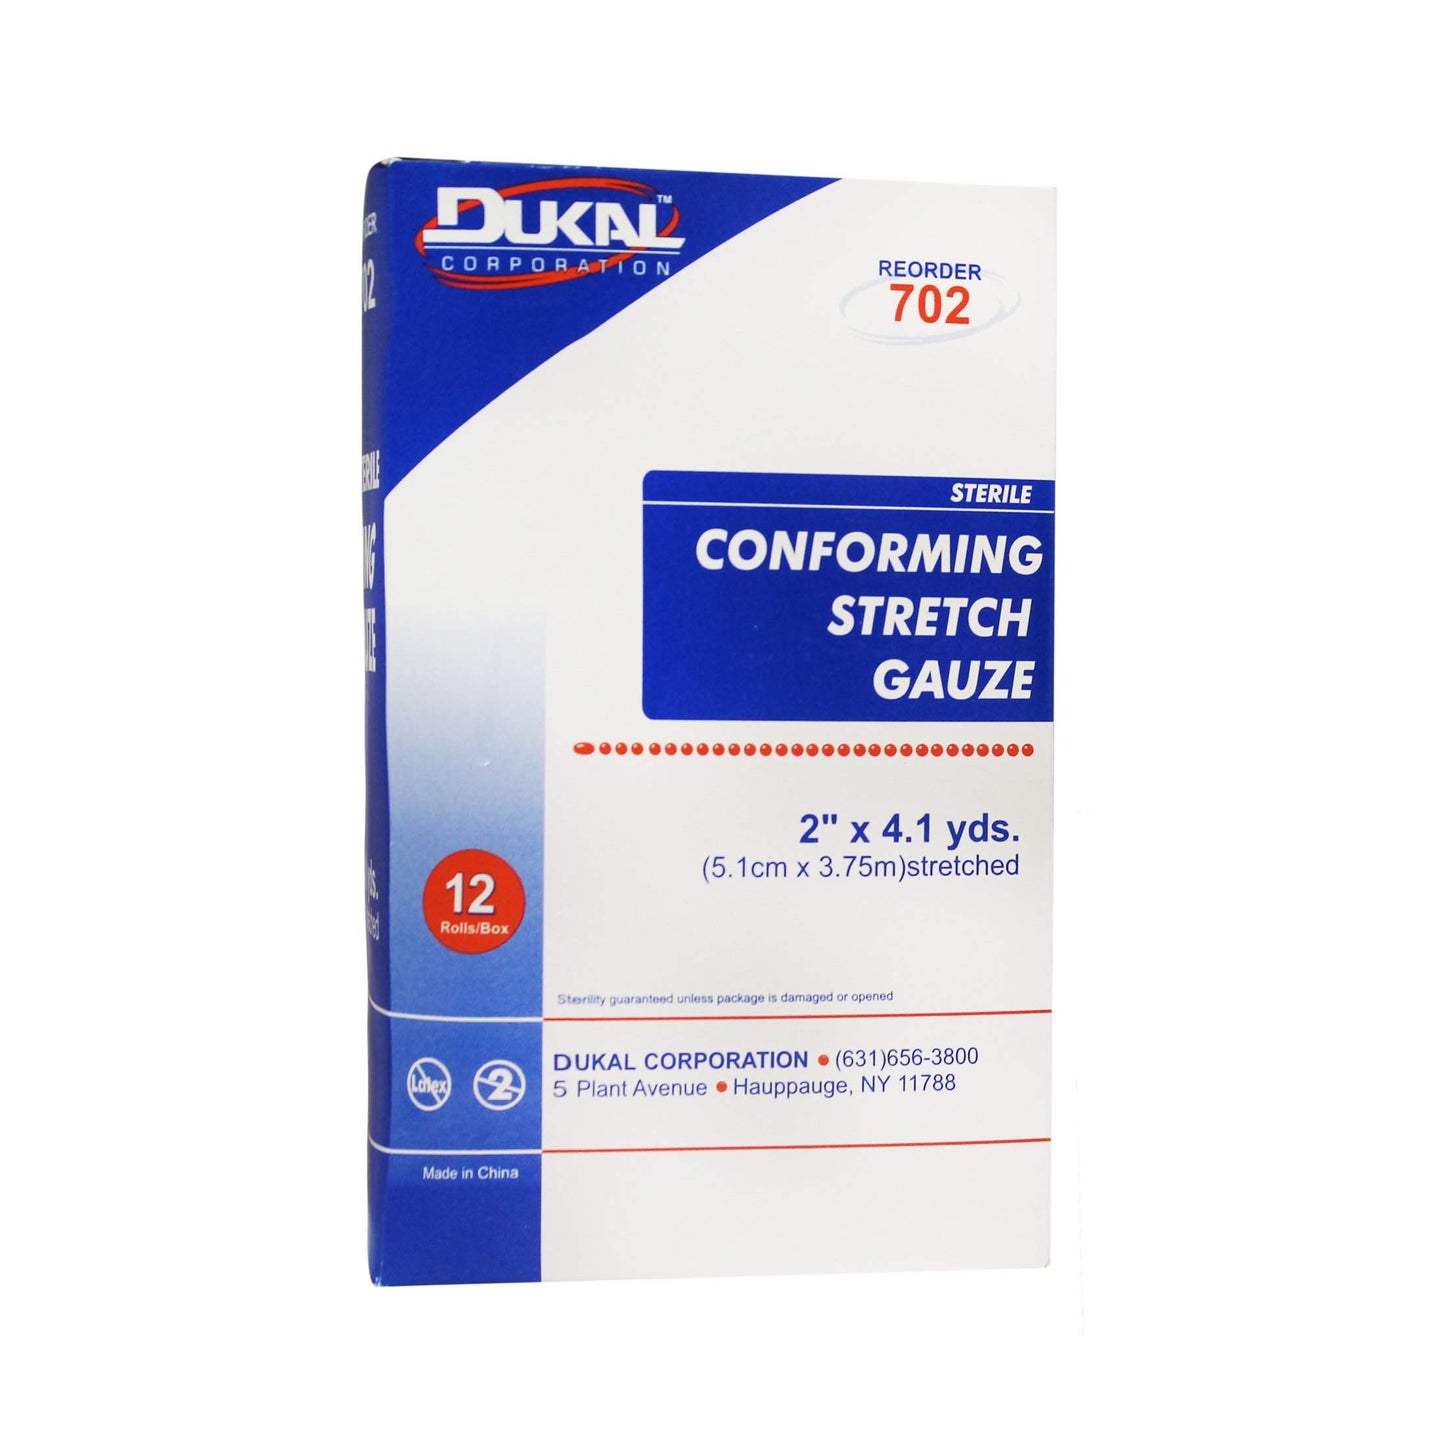 Dukal - 702 DUKAL Conforming Stretch Gauze Bandage, 2" x 4.1 yd, Sterile (Pack of 12)-Dukal-Brand_Dukal/ Dawn Mist,Collection_Lifestyle,Dukal_ Bandage,Dukal_Gauze,Dukal_Medical,Life_Medical,Life_Personal Care